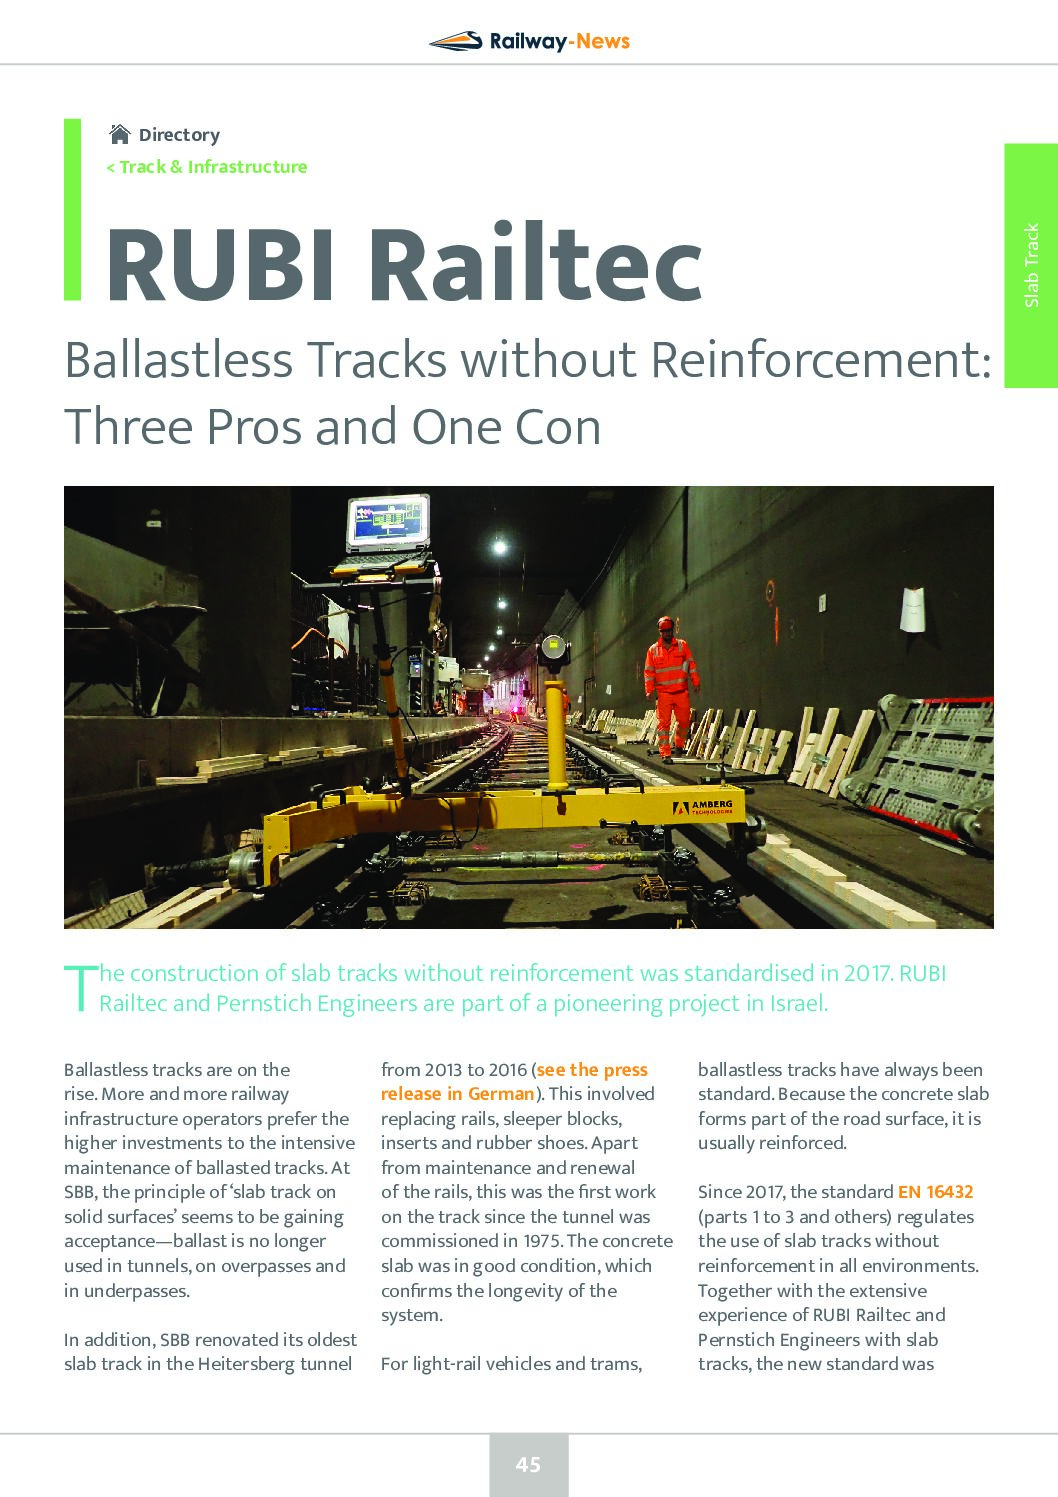 Ballastless Tracks without Reinforcement: Three Pros and One Con